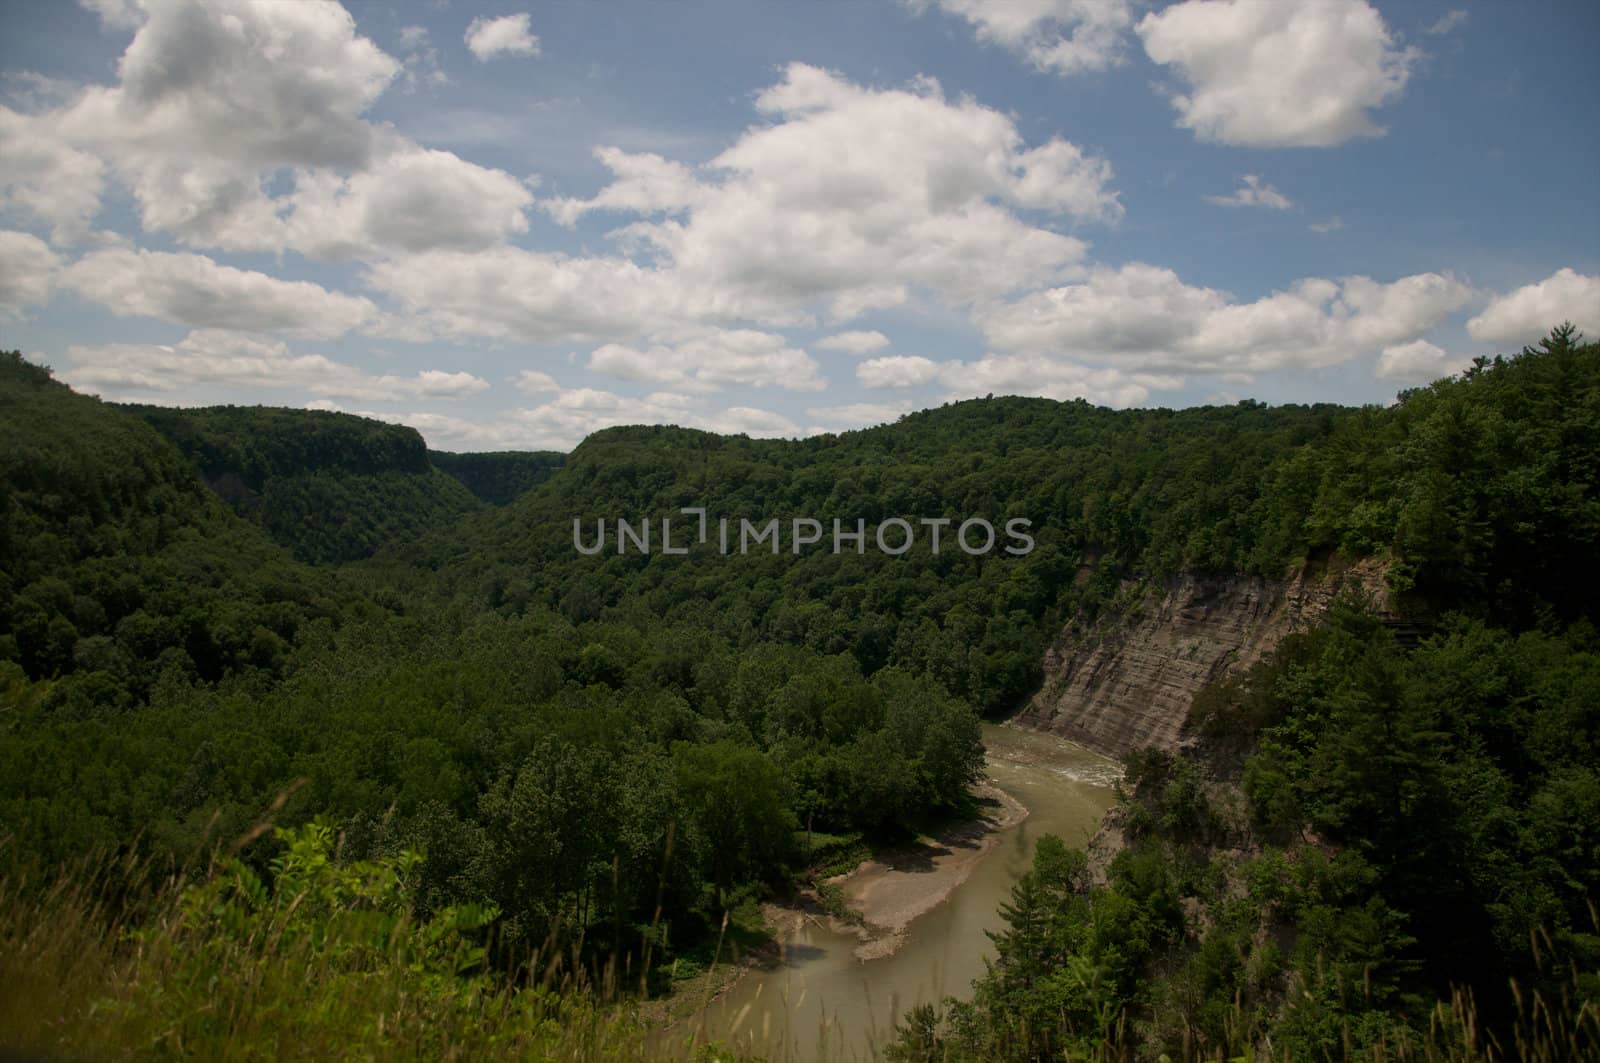 Letchworth State Park in western New York boasts one of the deepest canyons in eastern North America.







Letchworth State Park in Western New York features one of the deepest canyons in the Eastern United States.